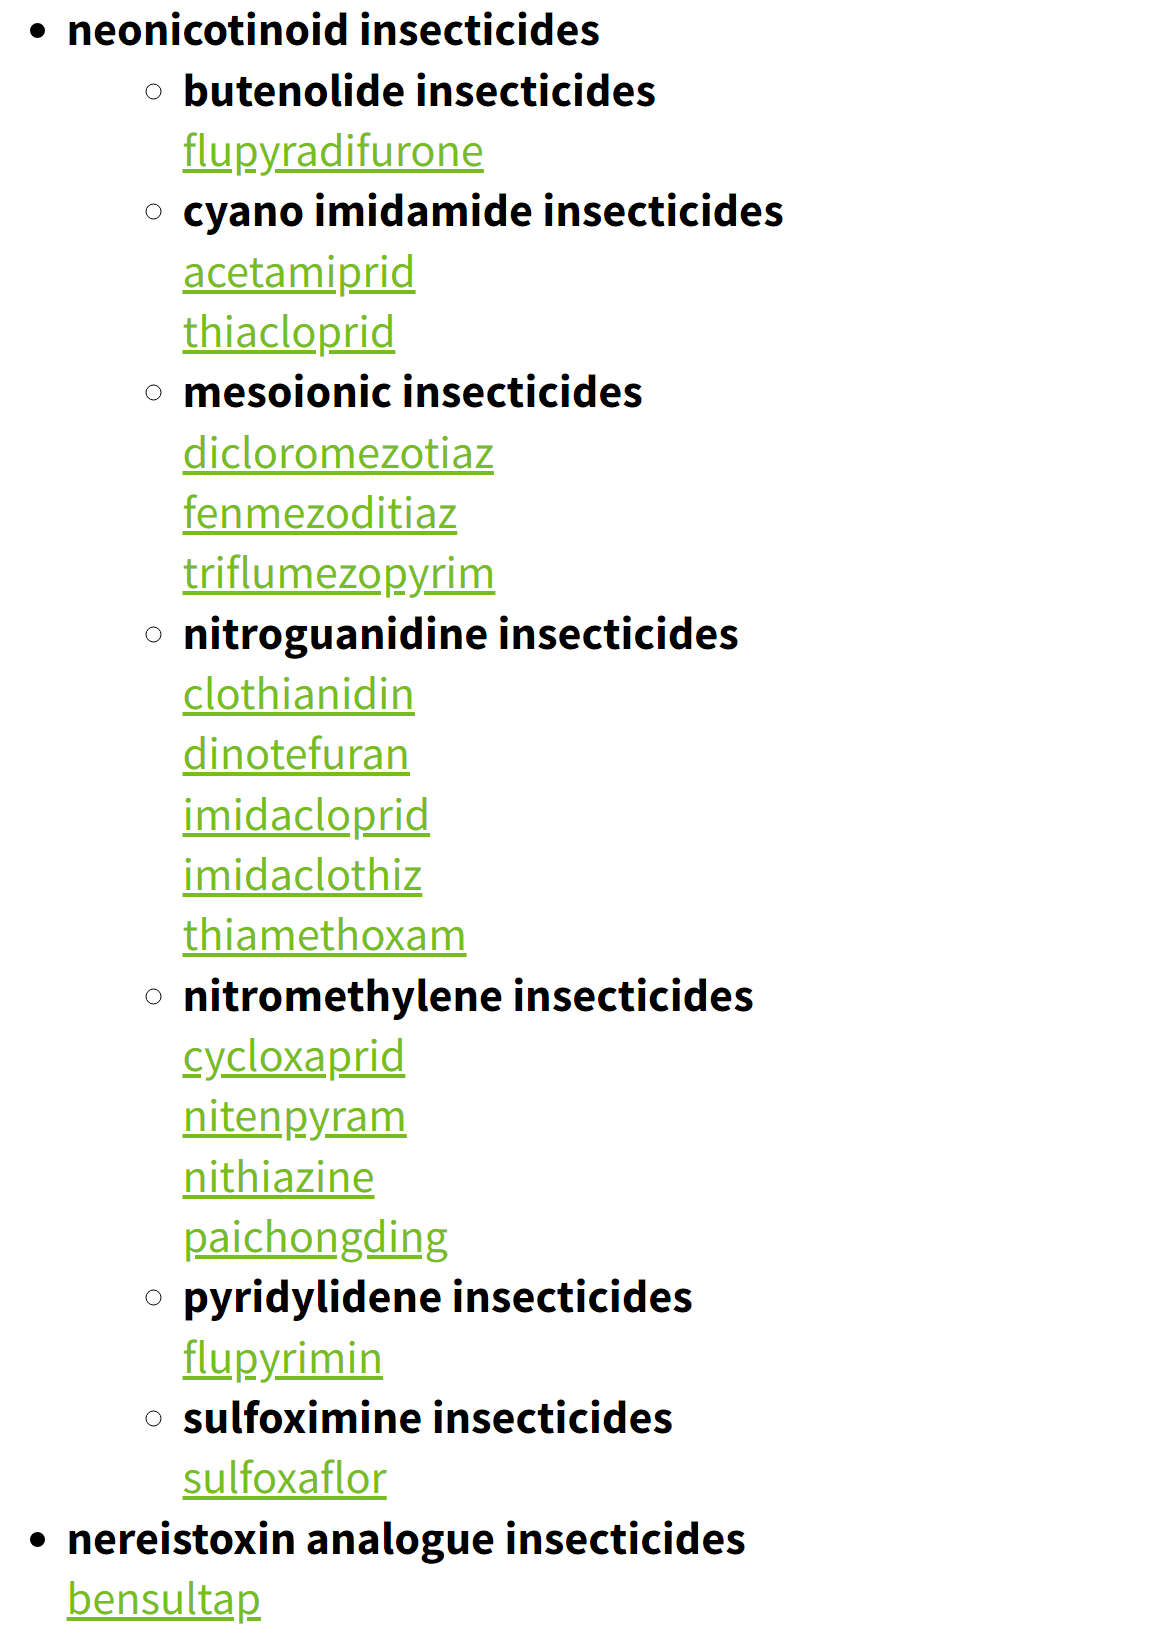 Finding insecticides that are related to 'imidacloprid'